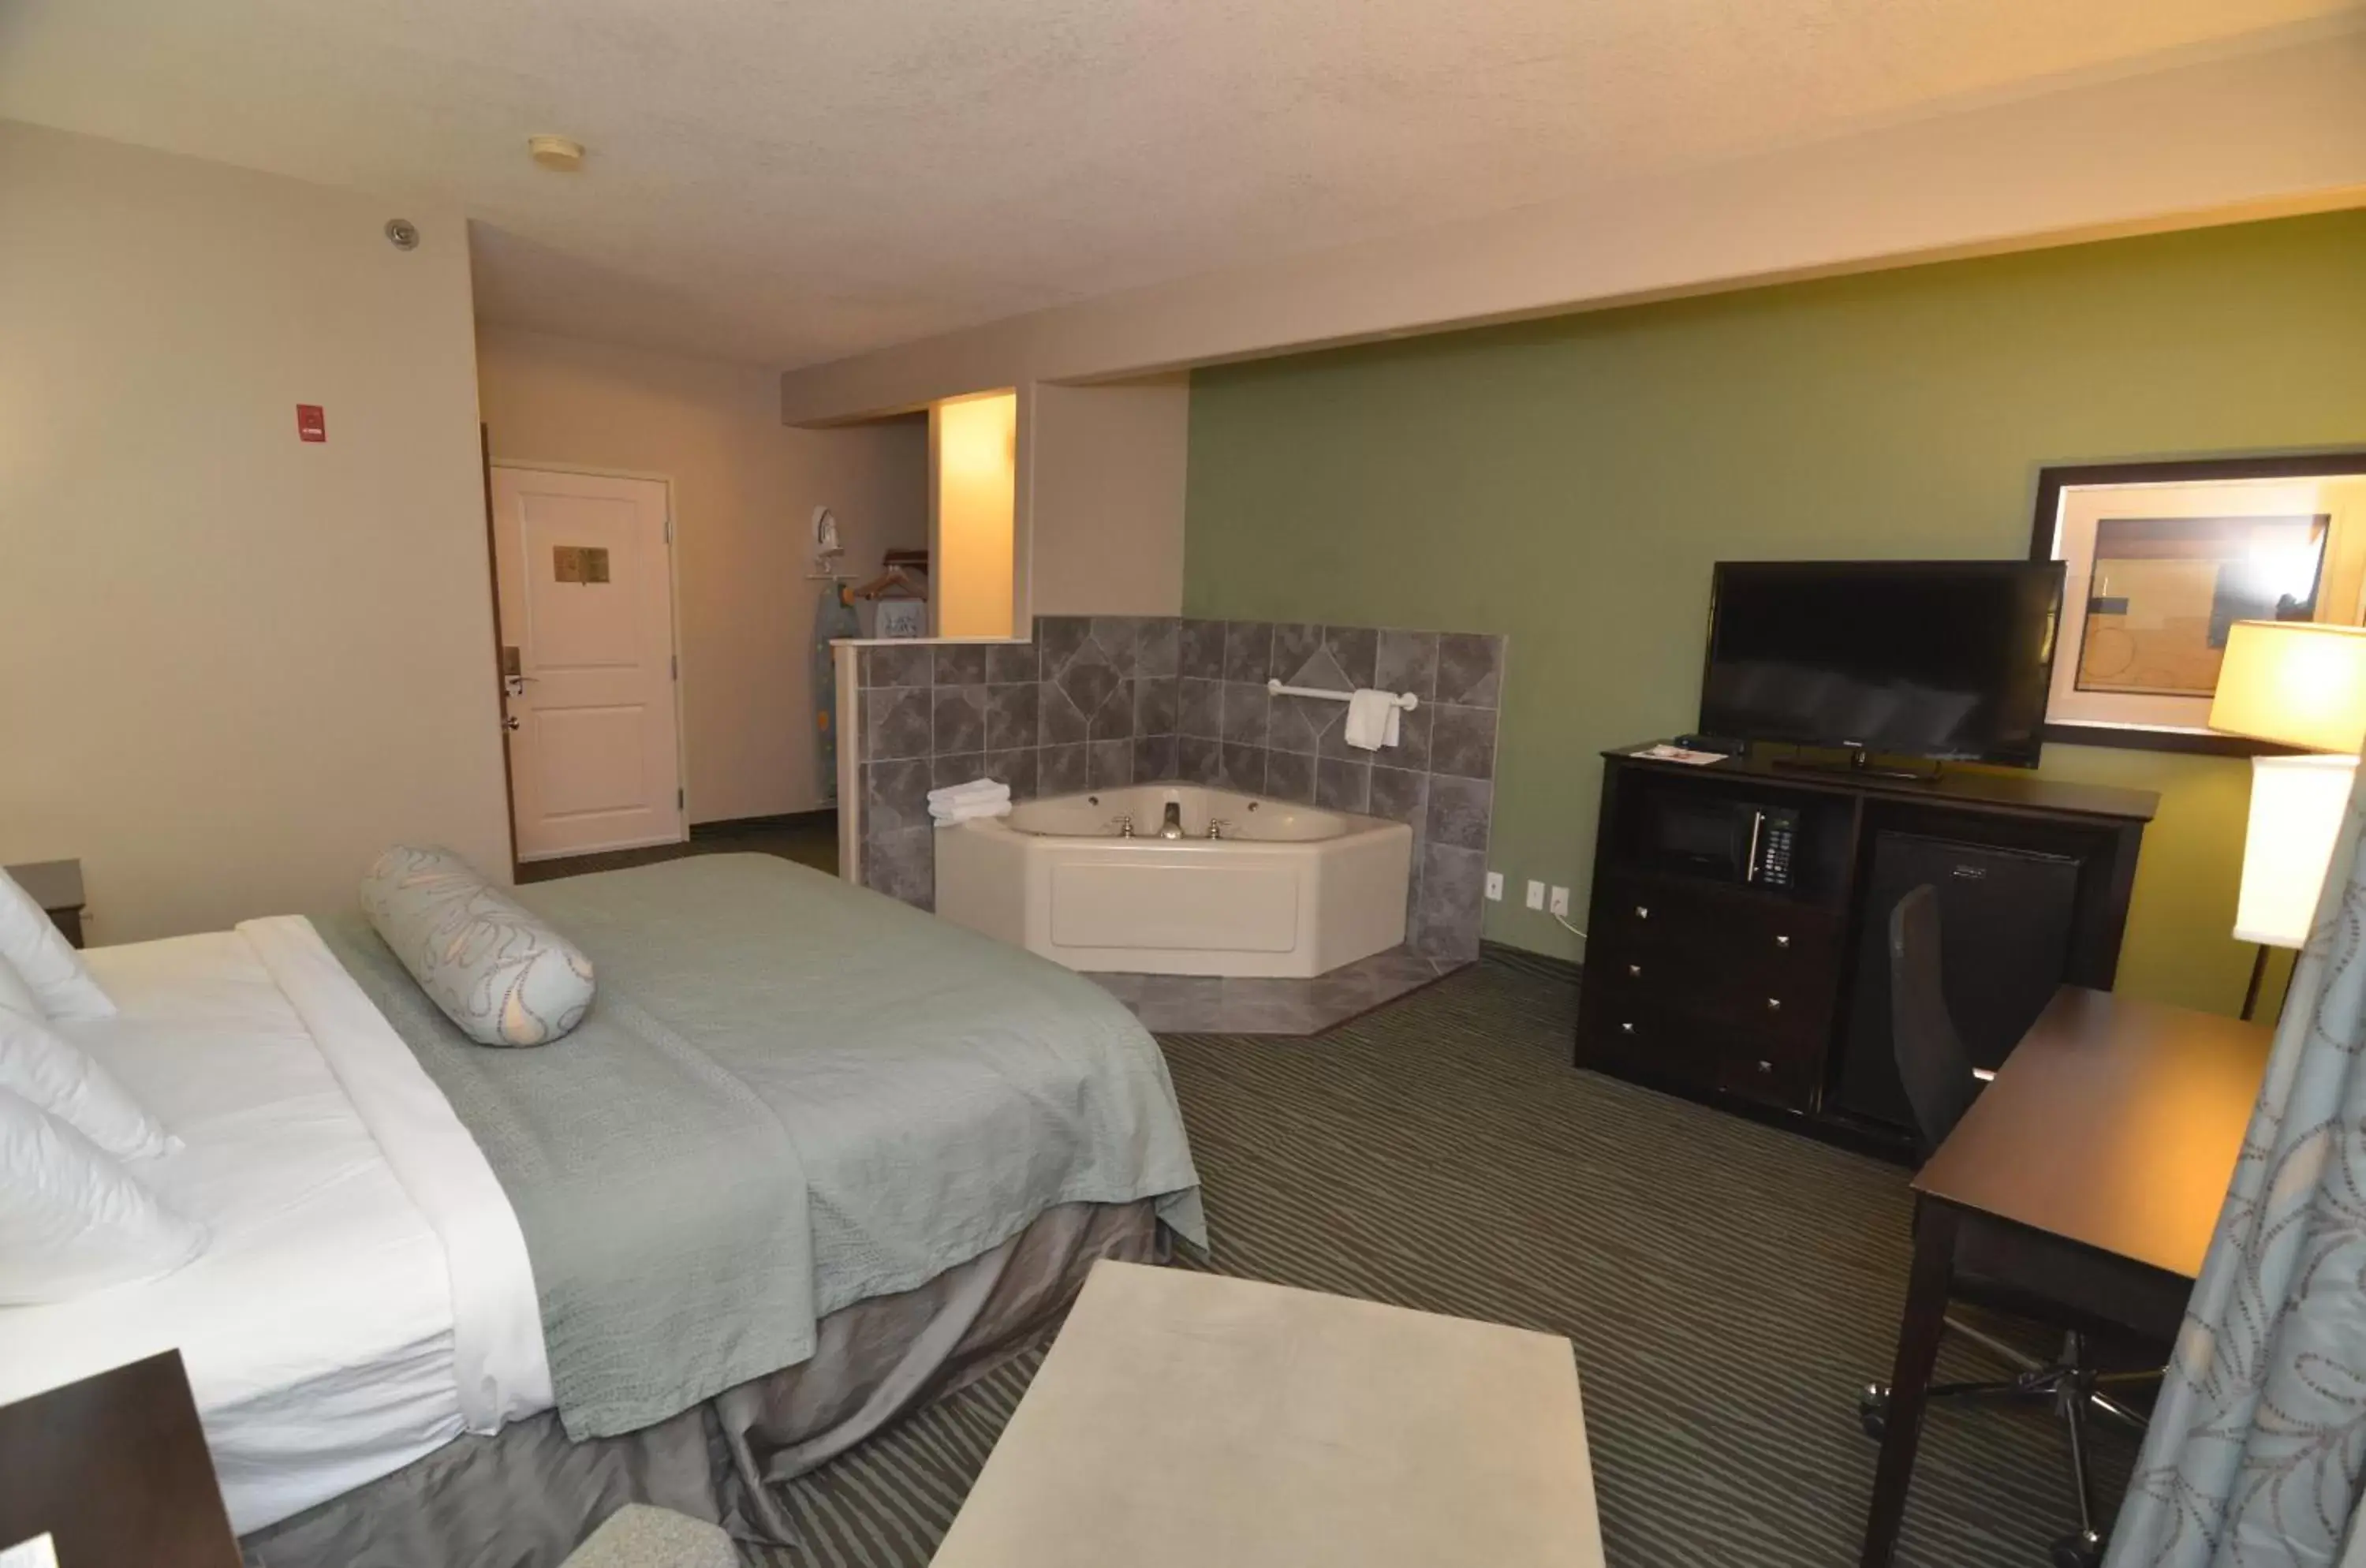 Hot Tub, Bed in AmericInn by Wyndham Des Moines Airport